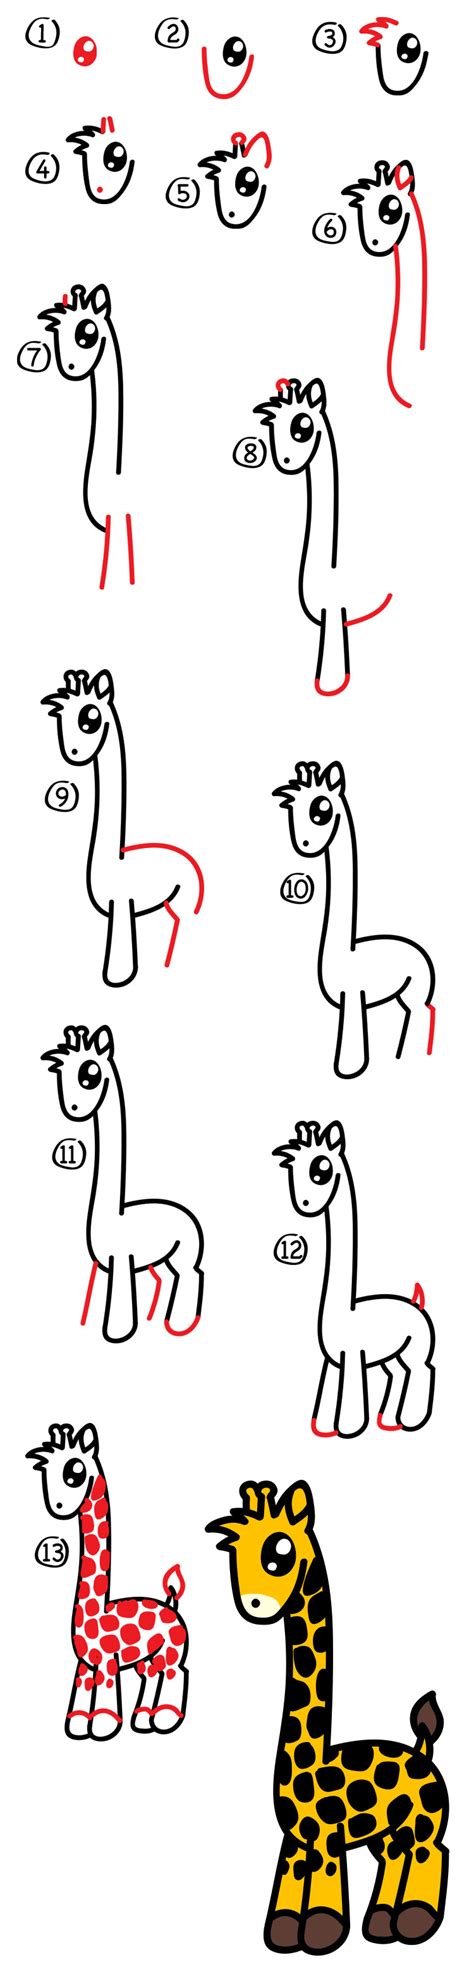 How To Draw A Giraffe For Kids Step By Step